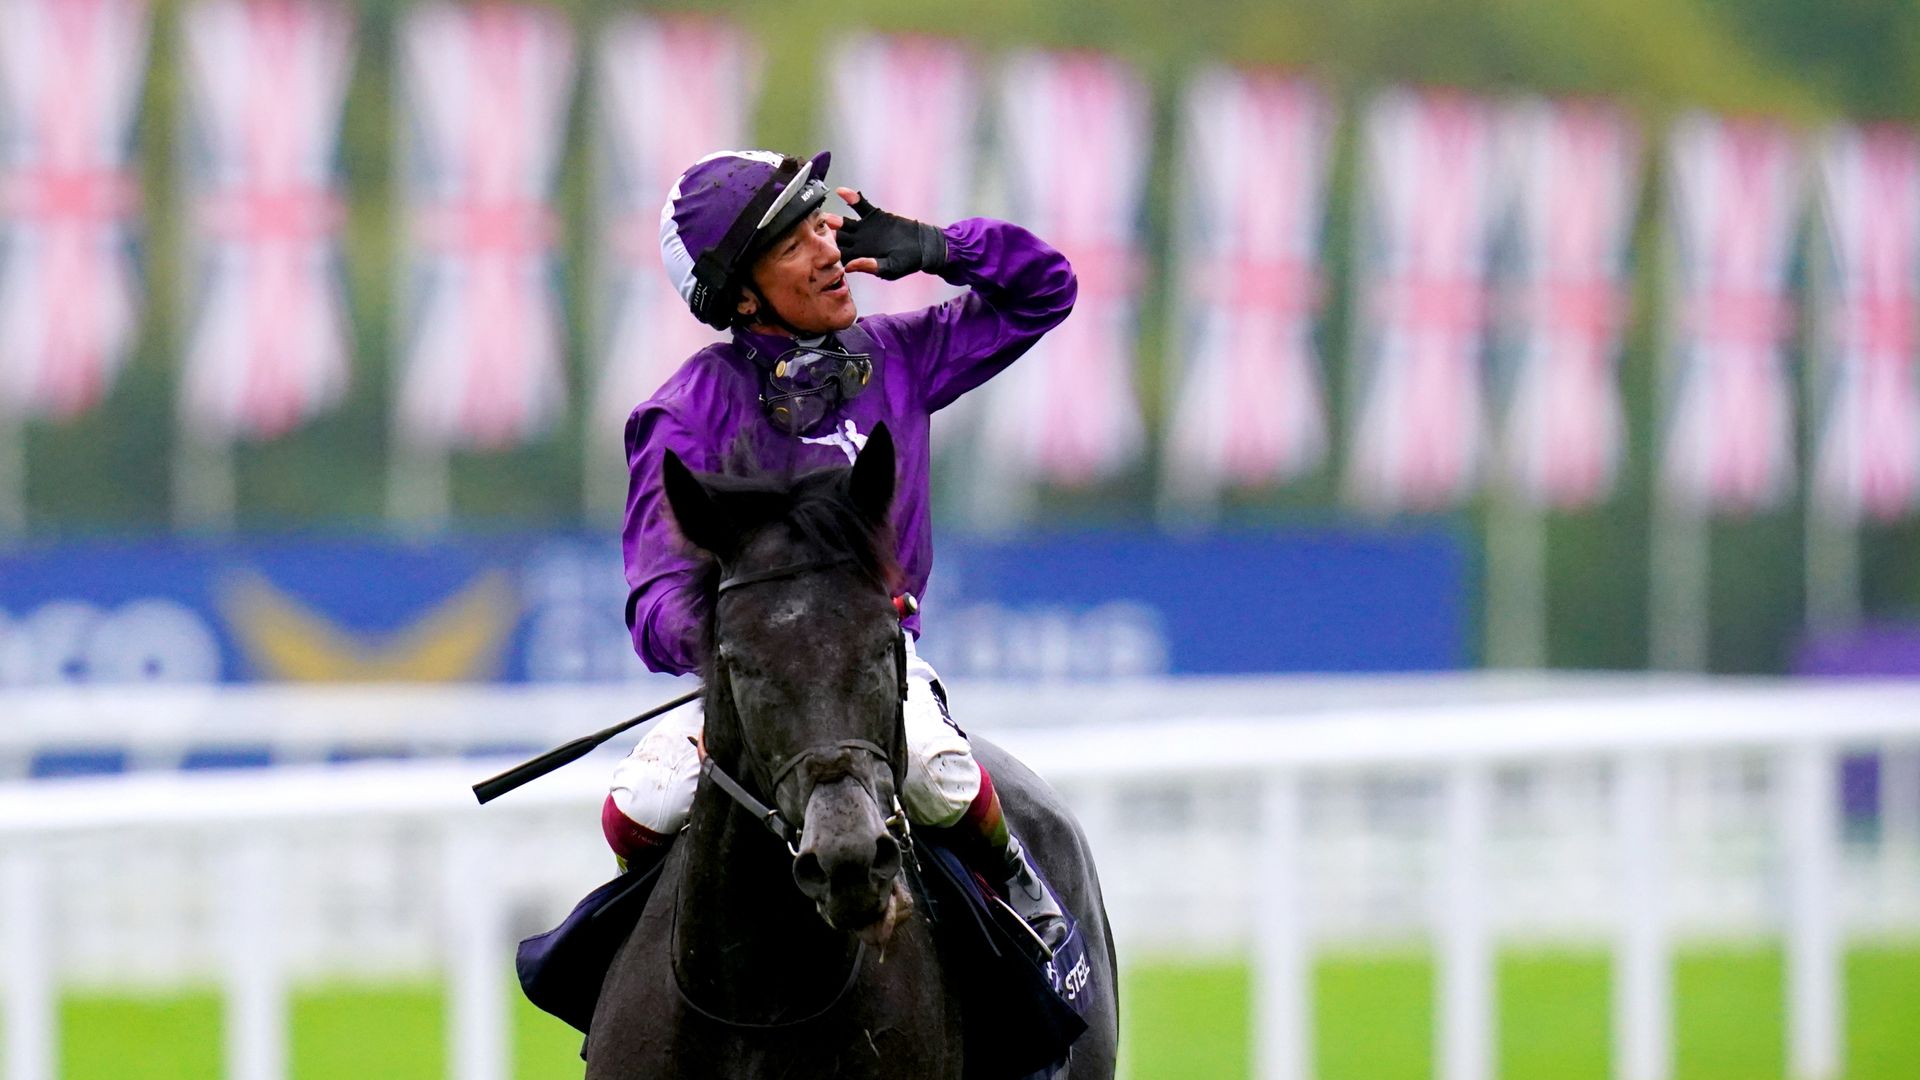 The King of Ascot! Dettori gets fairytale ending aboard King Of Steel